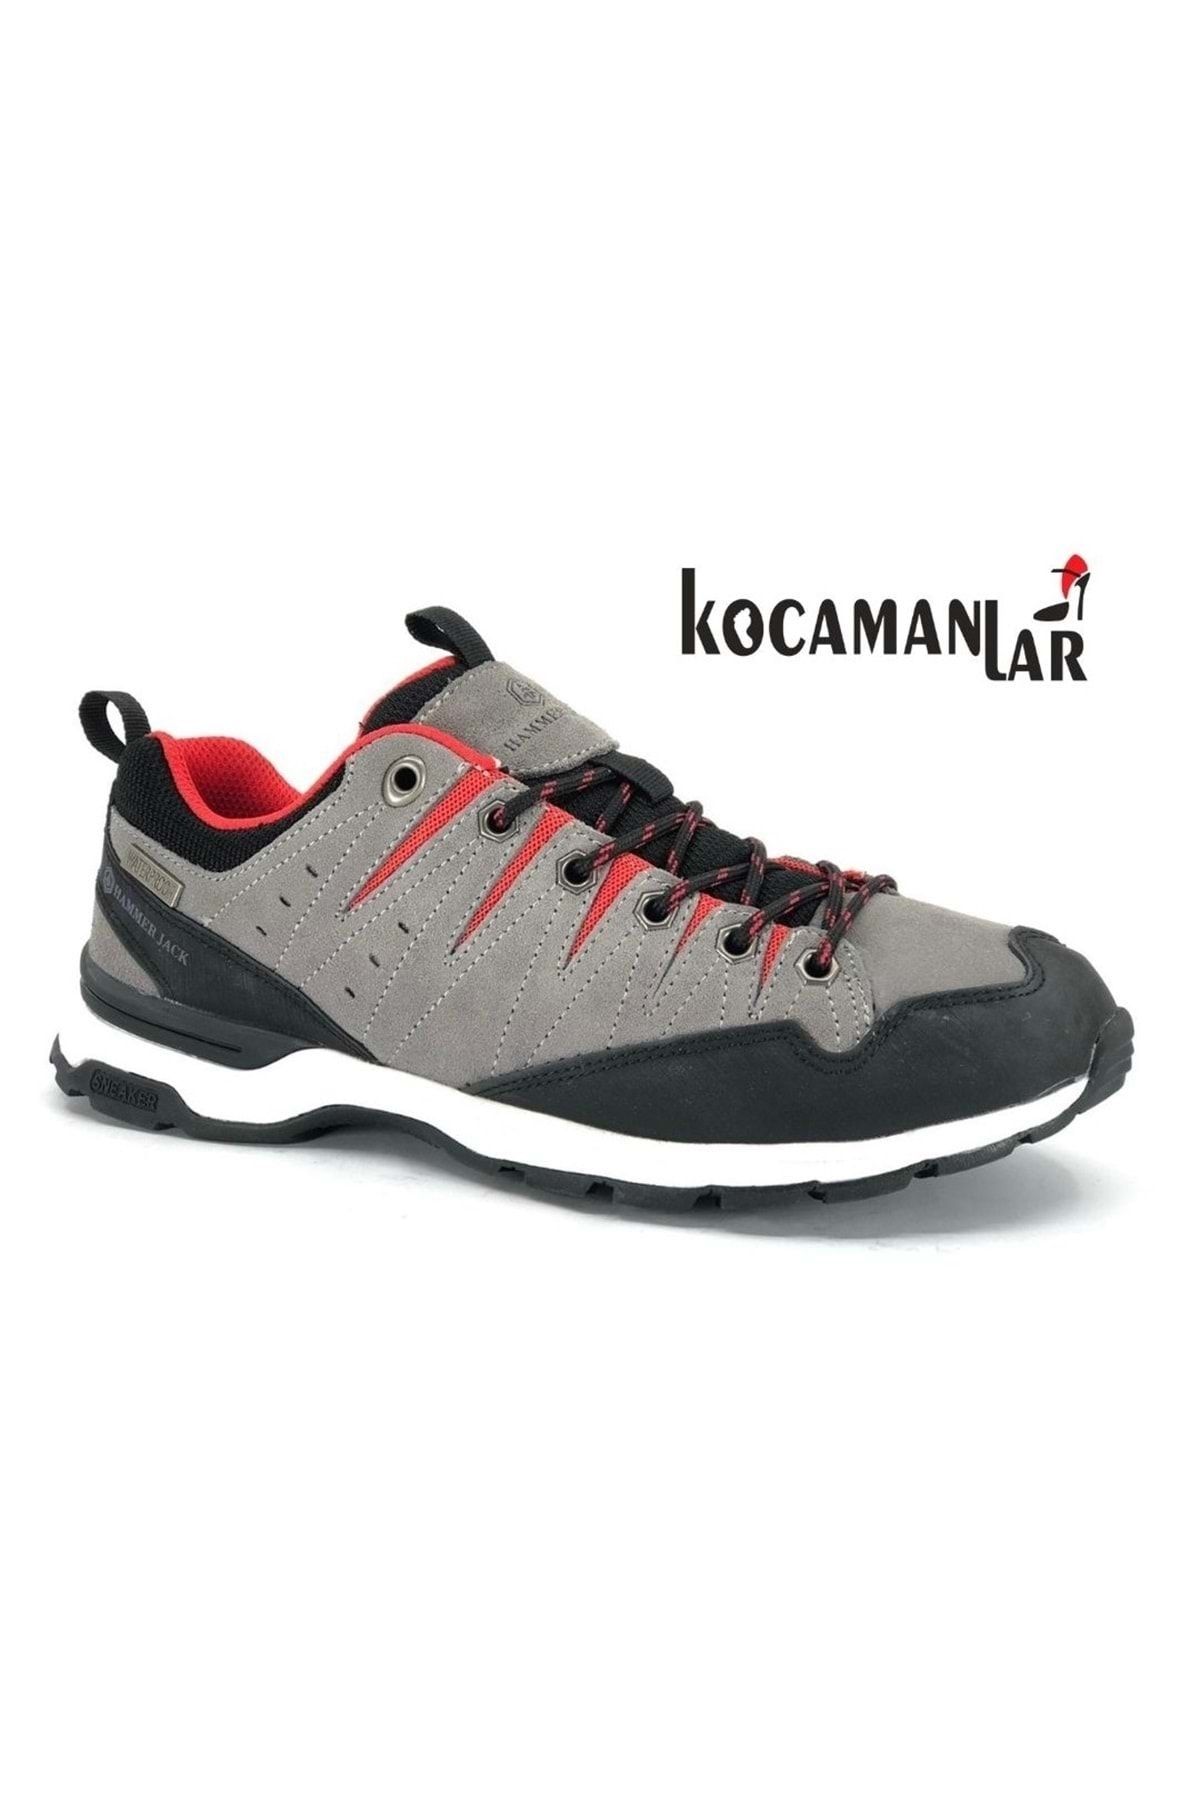 Hammer Jack 101-23134 Vuckong Outdoor Leather Men's Sports Shoes GRAY